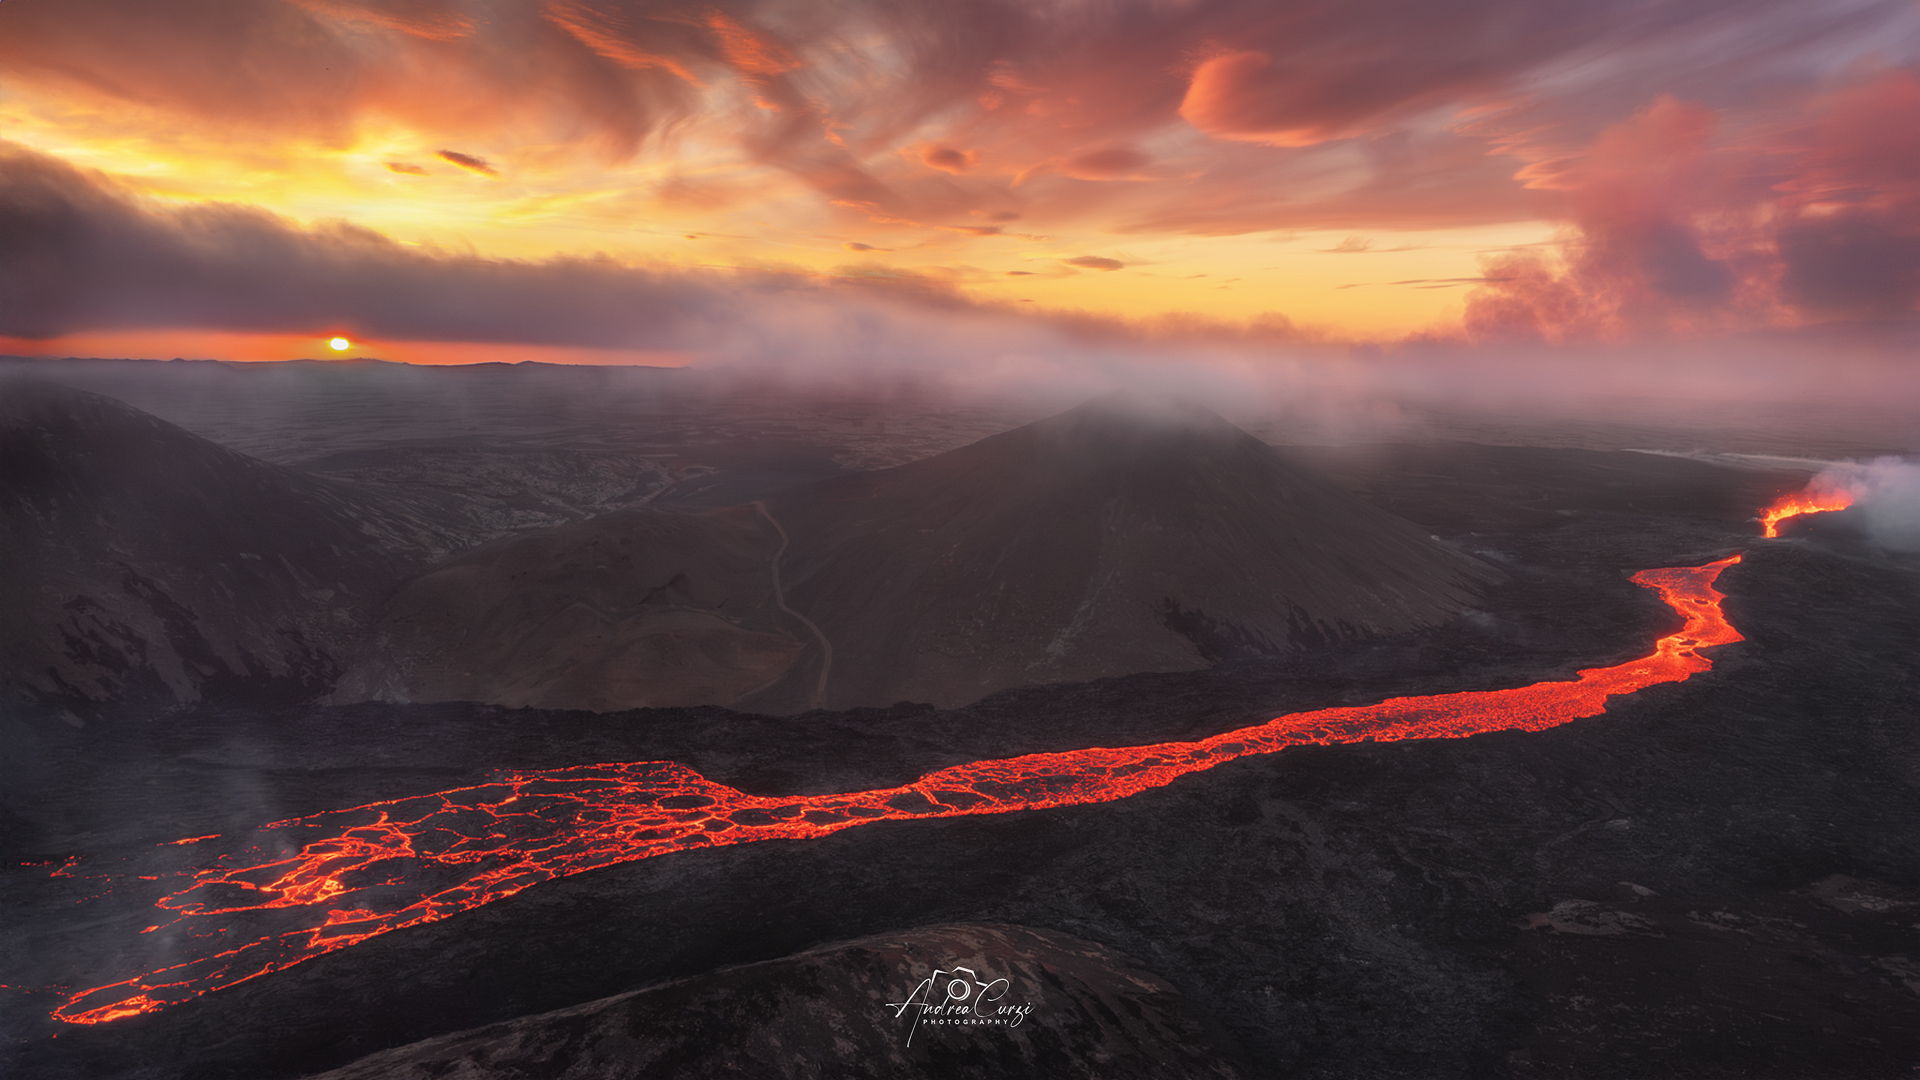 A sunset over the volcano...